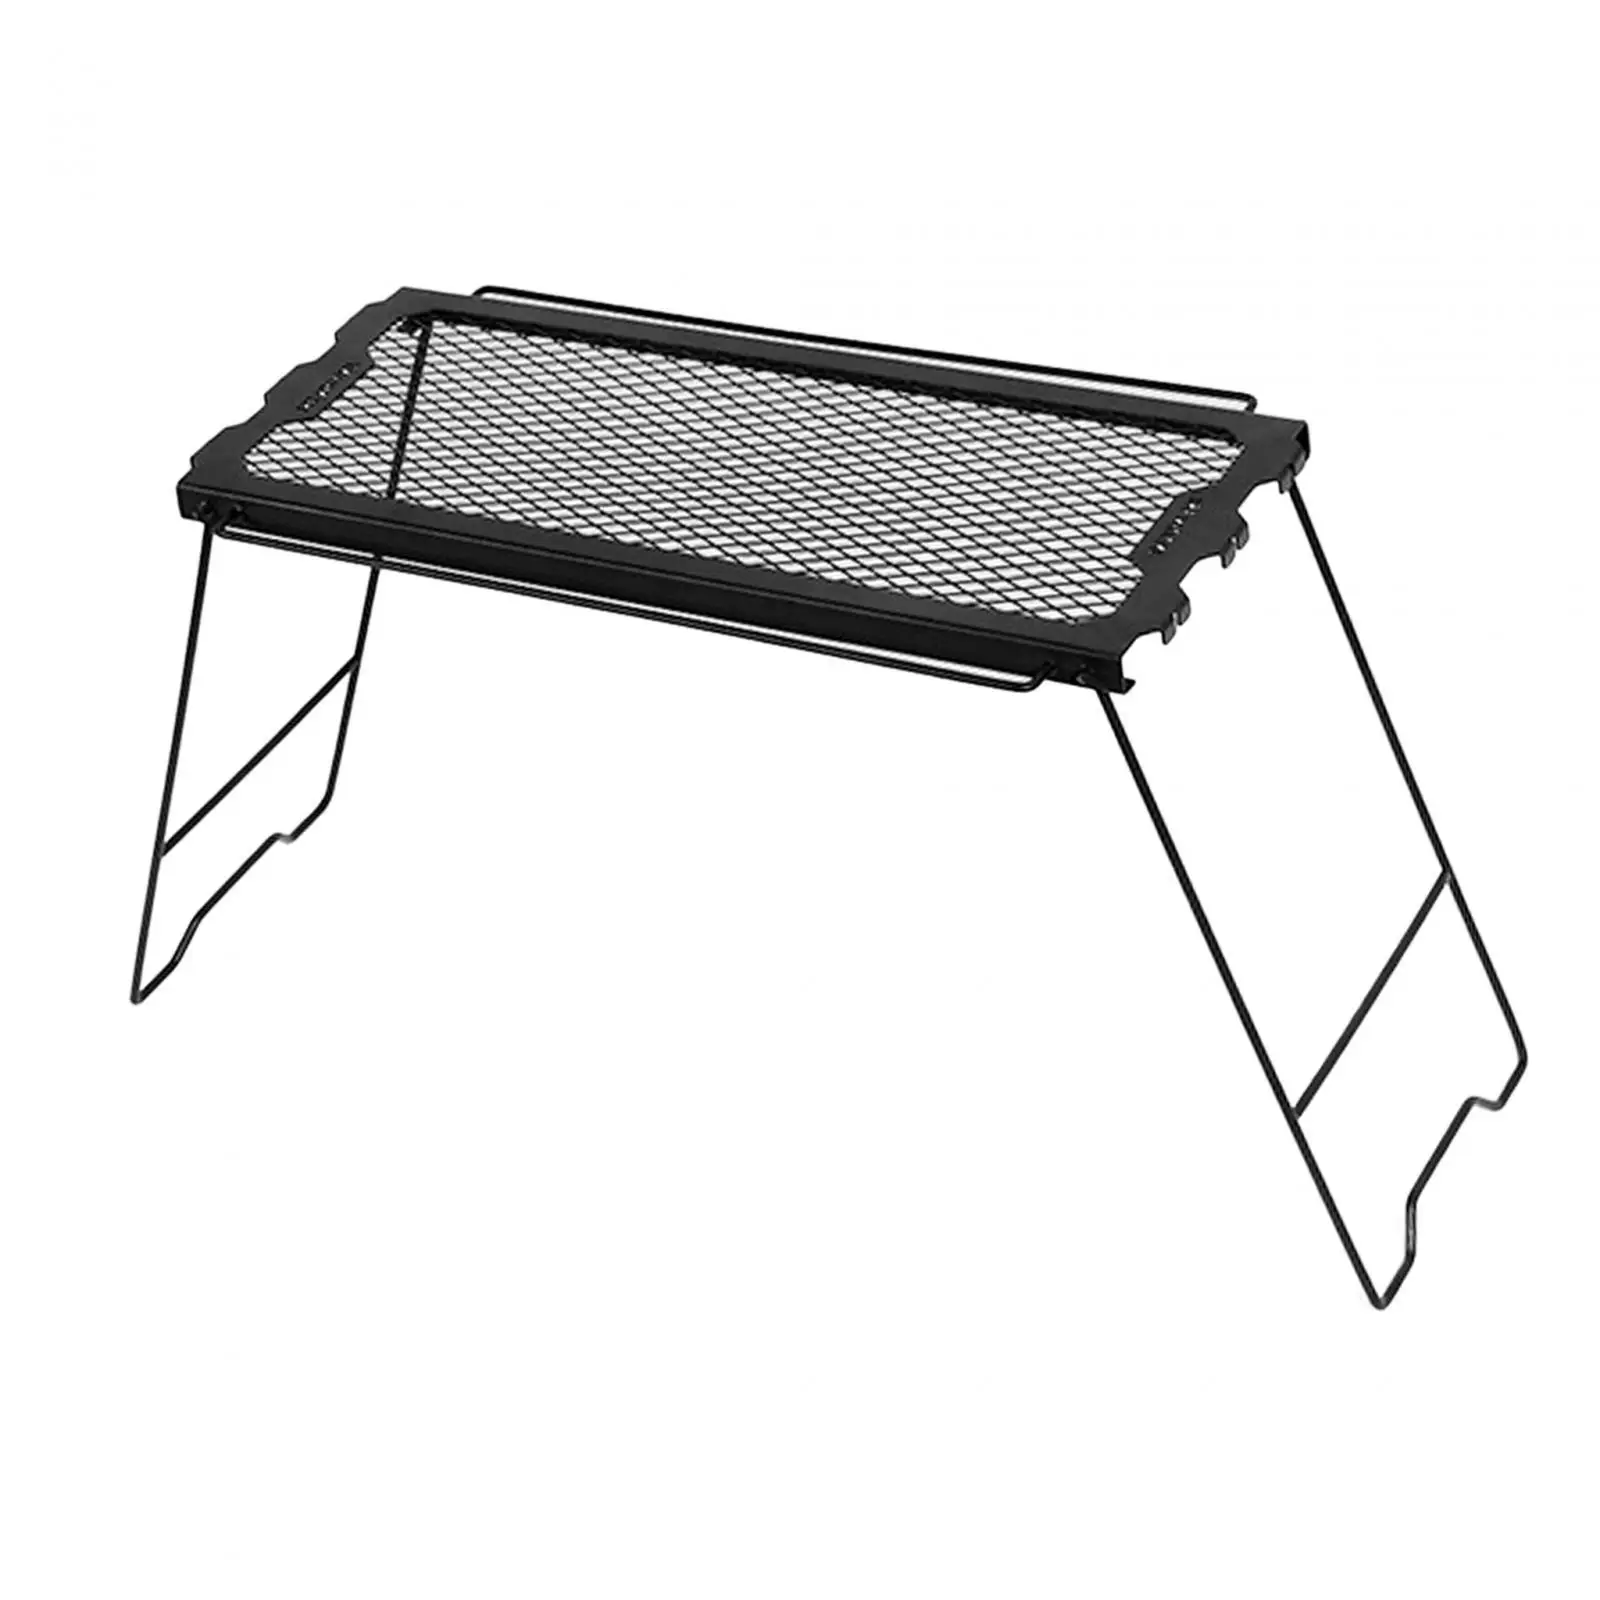 Folding Camping Table Portable Small Table Foldable Campfire Grill Camping Cooking Grate for Patio BBQ Indoor RV Beach